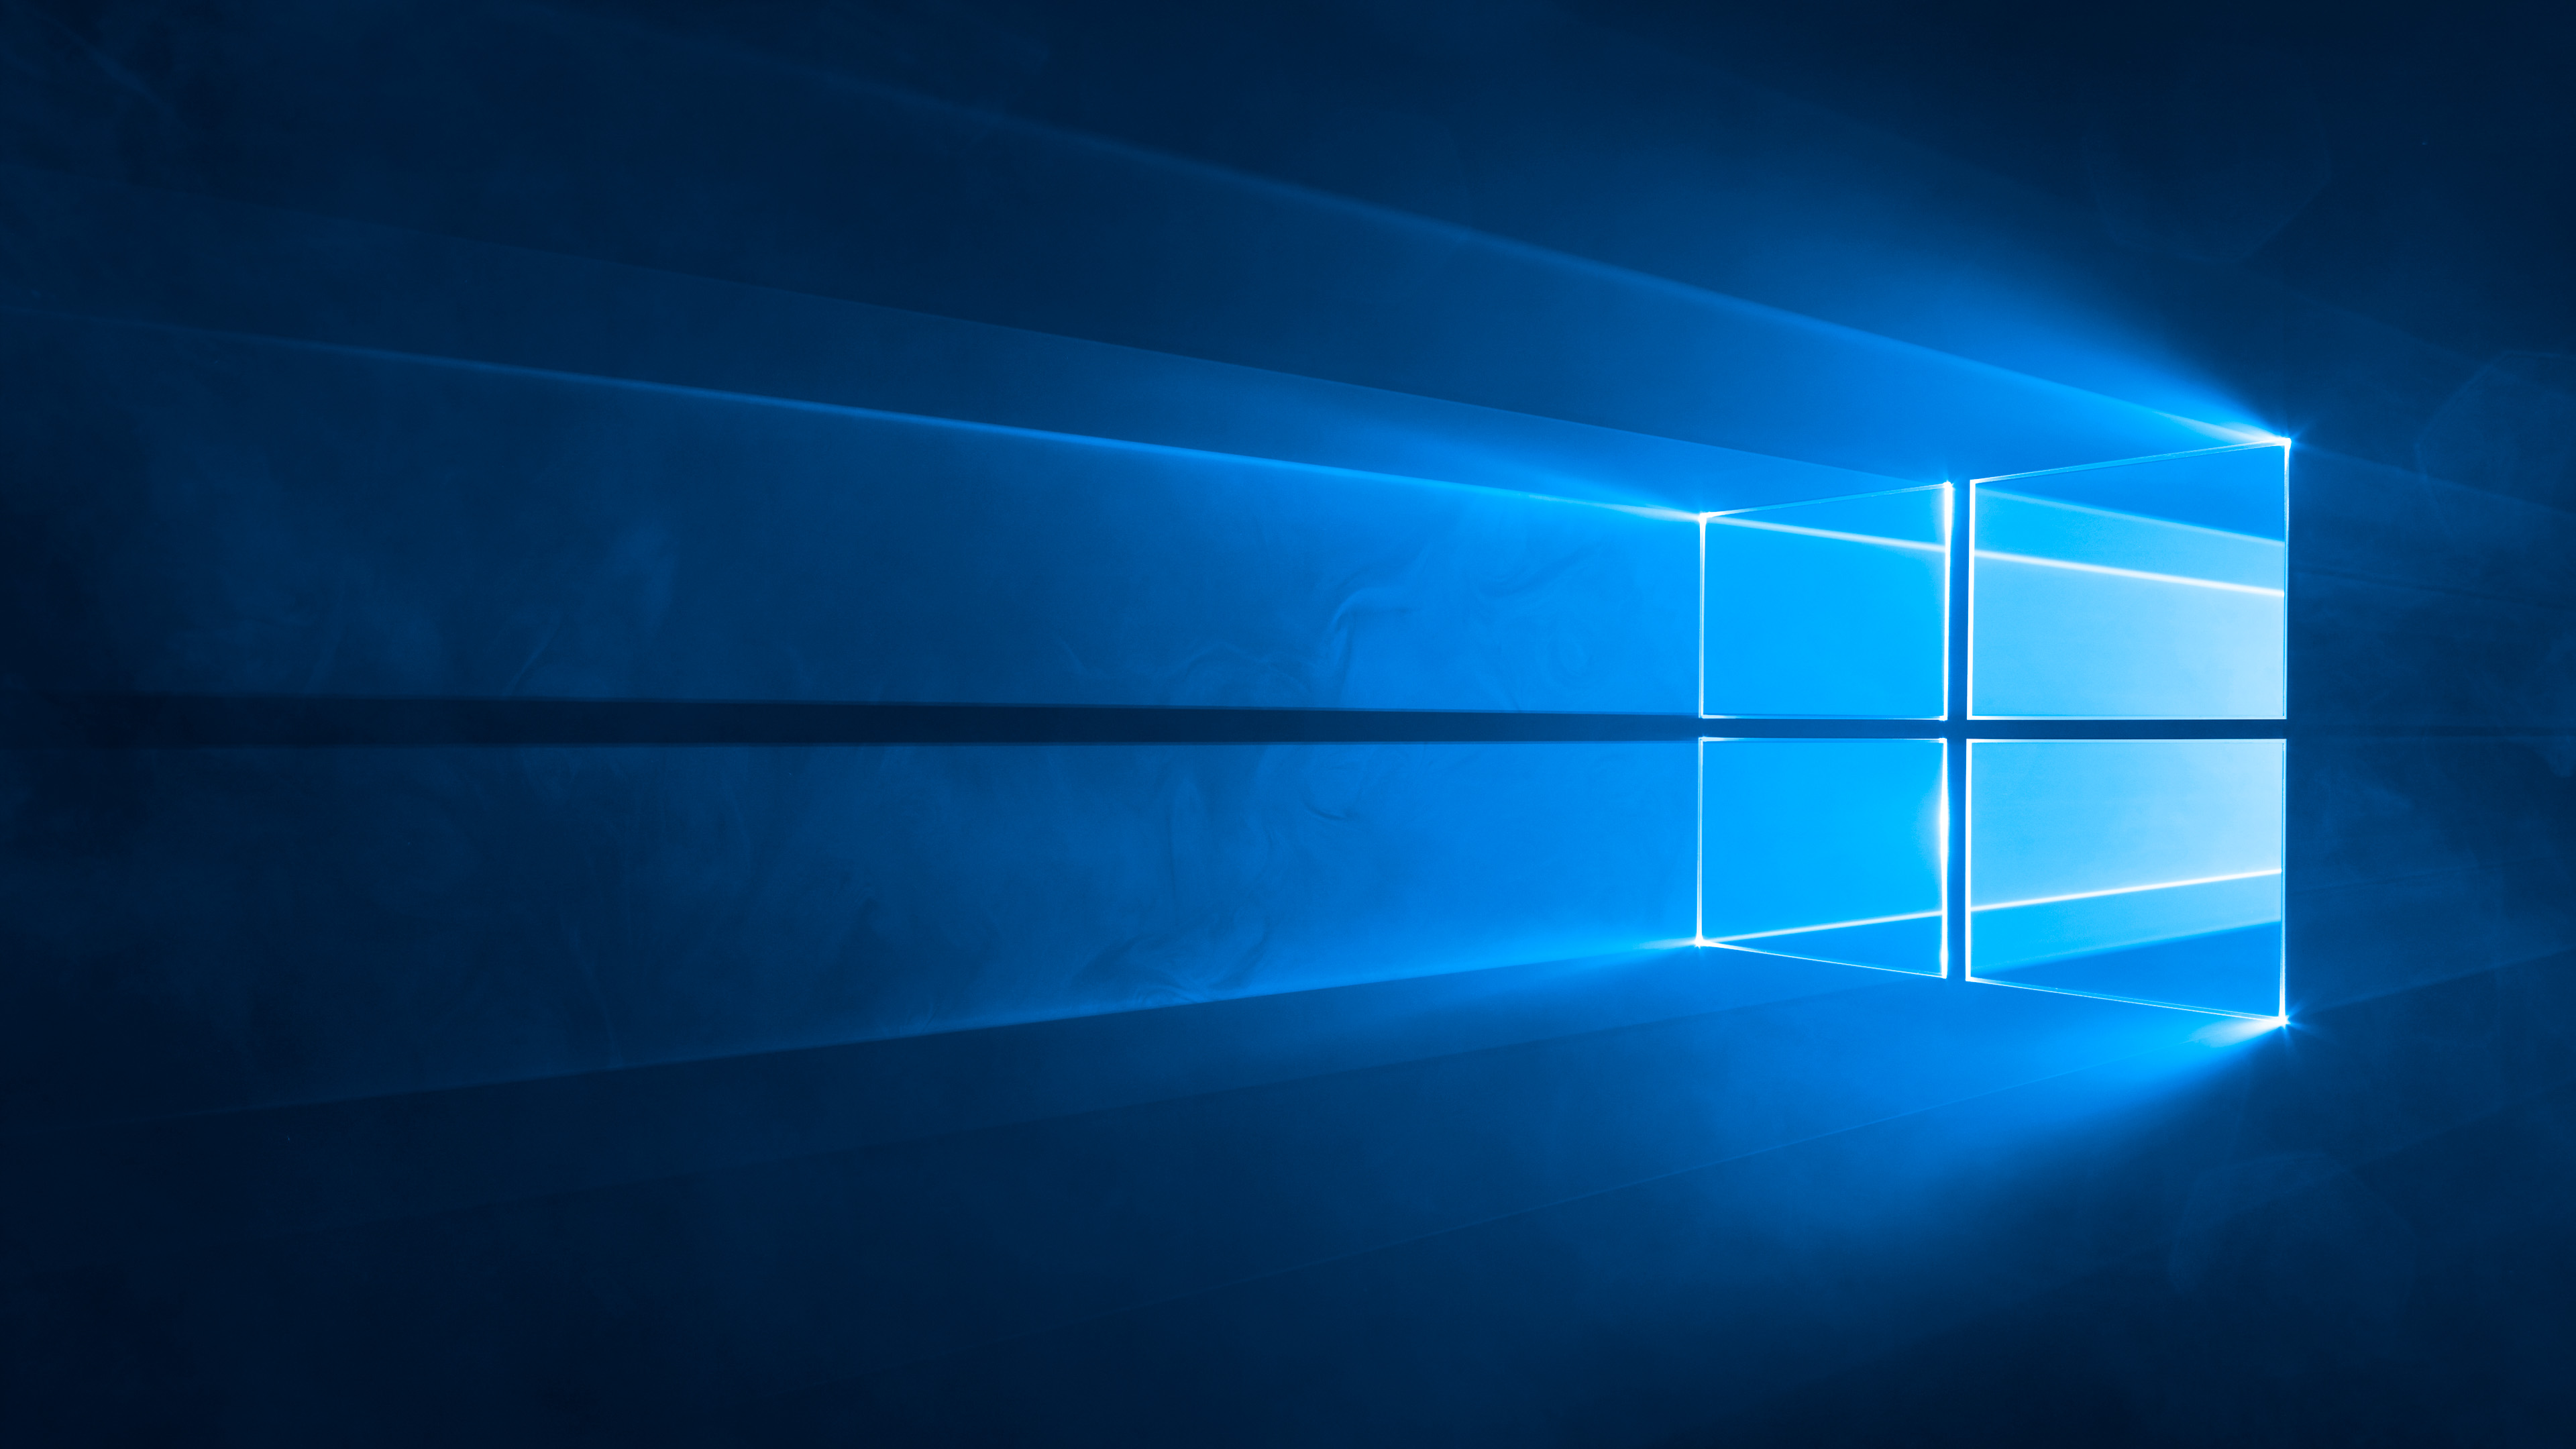 Download the stock Windows 10 wallpapers for your tablet or